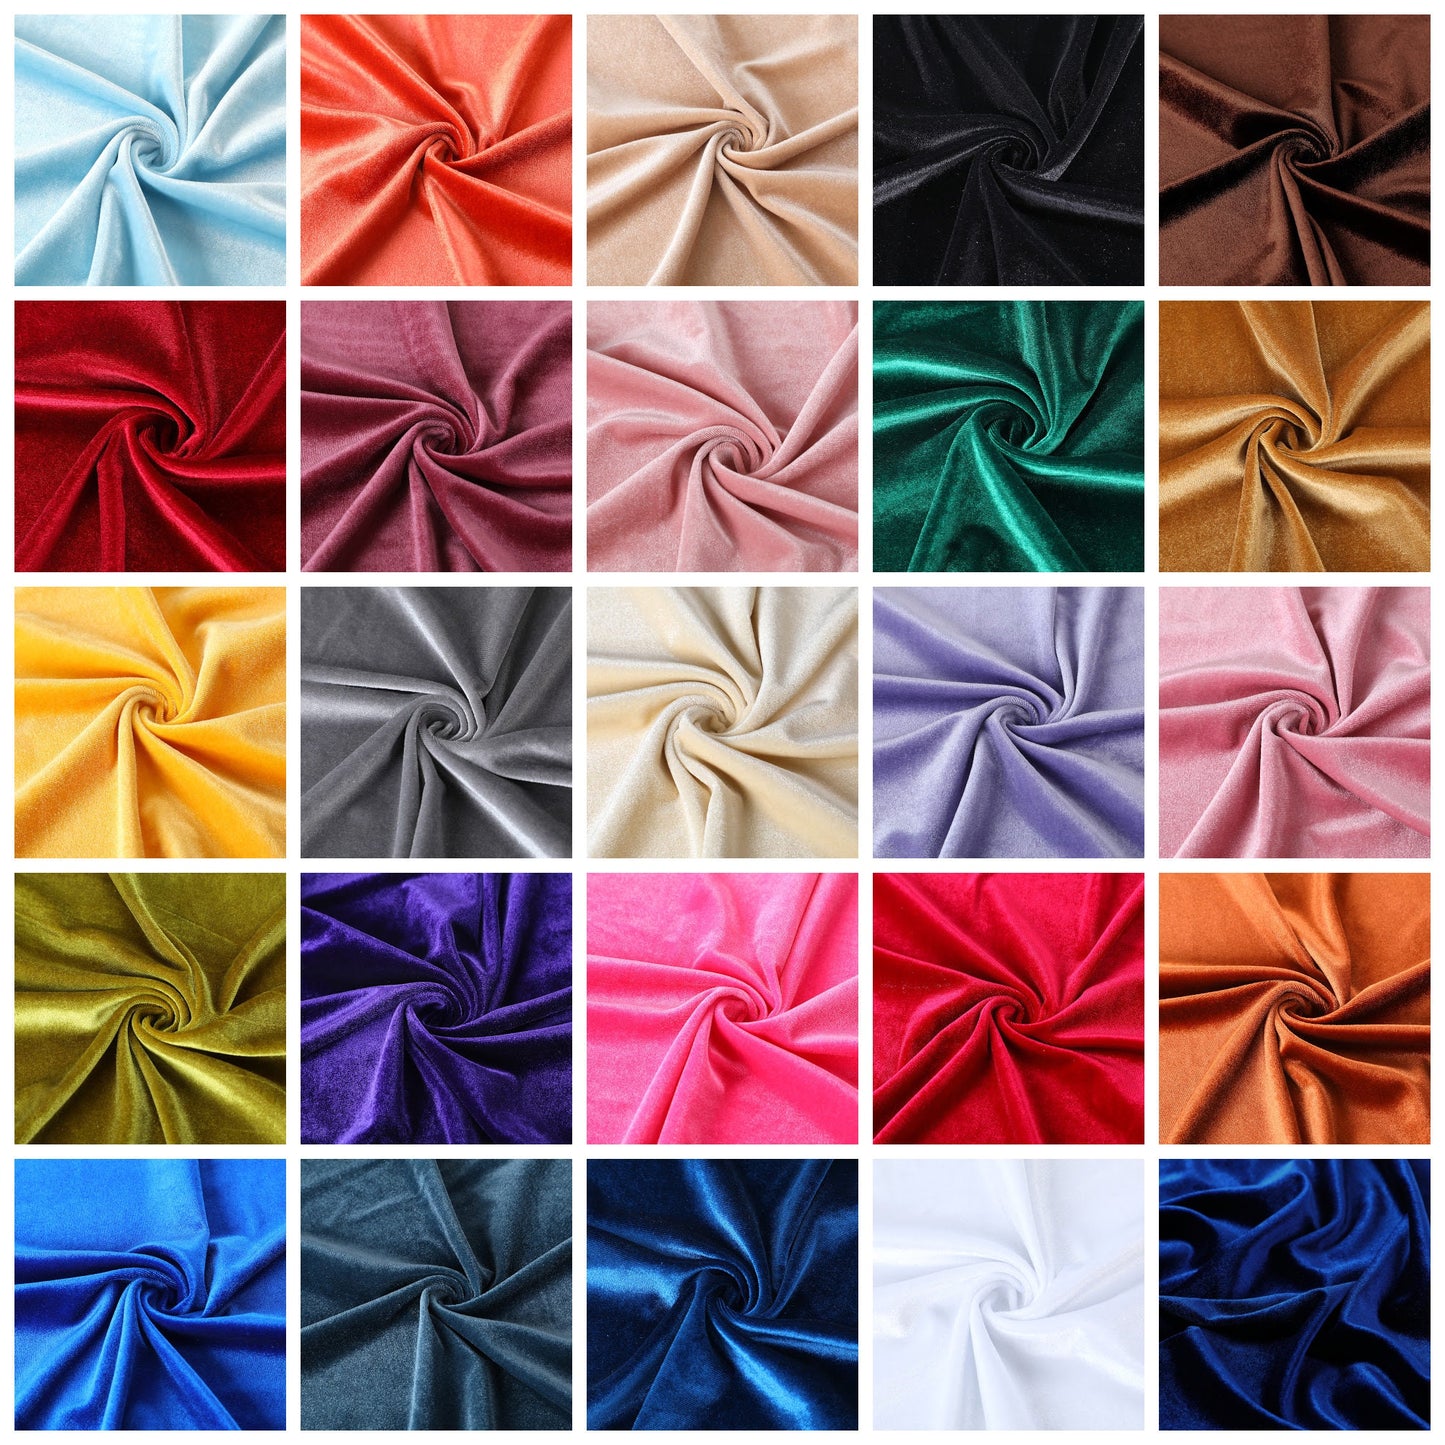 Gold Stretchy Velvet Fabric by The Yard Stretch Fabrics Polyester Spandex for Scrunchies Clothes Costumes Crafts Bows